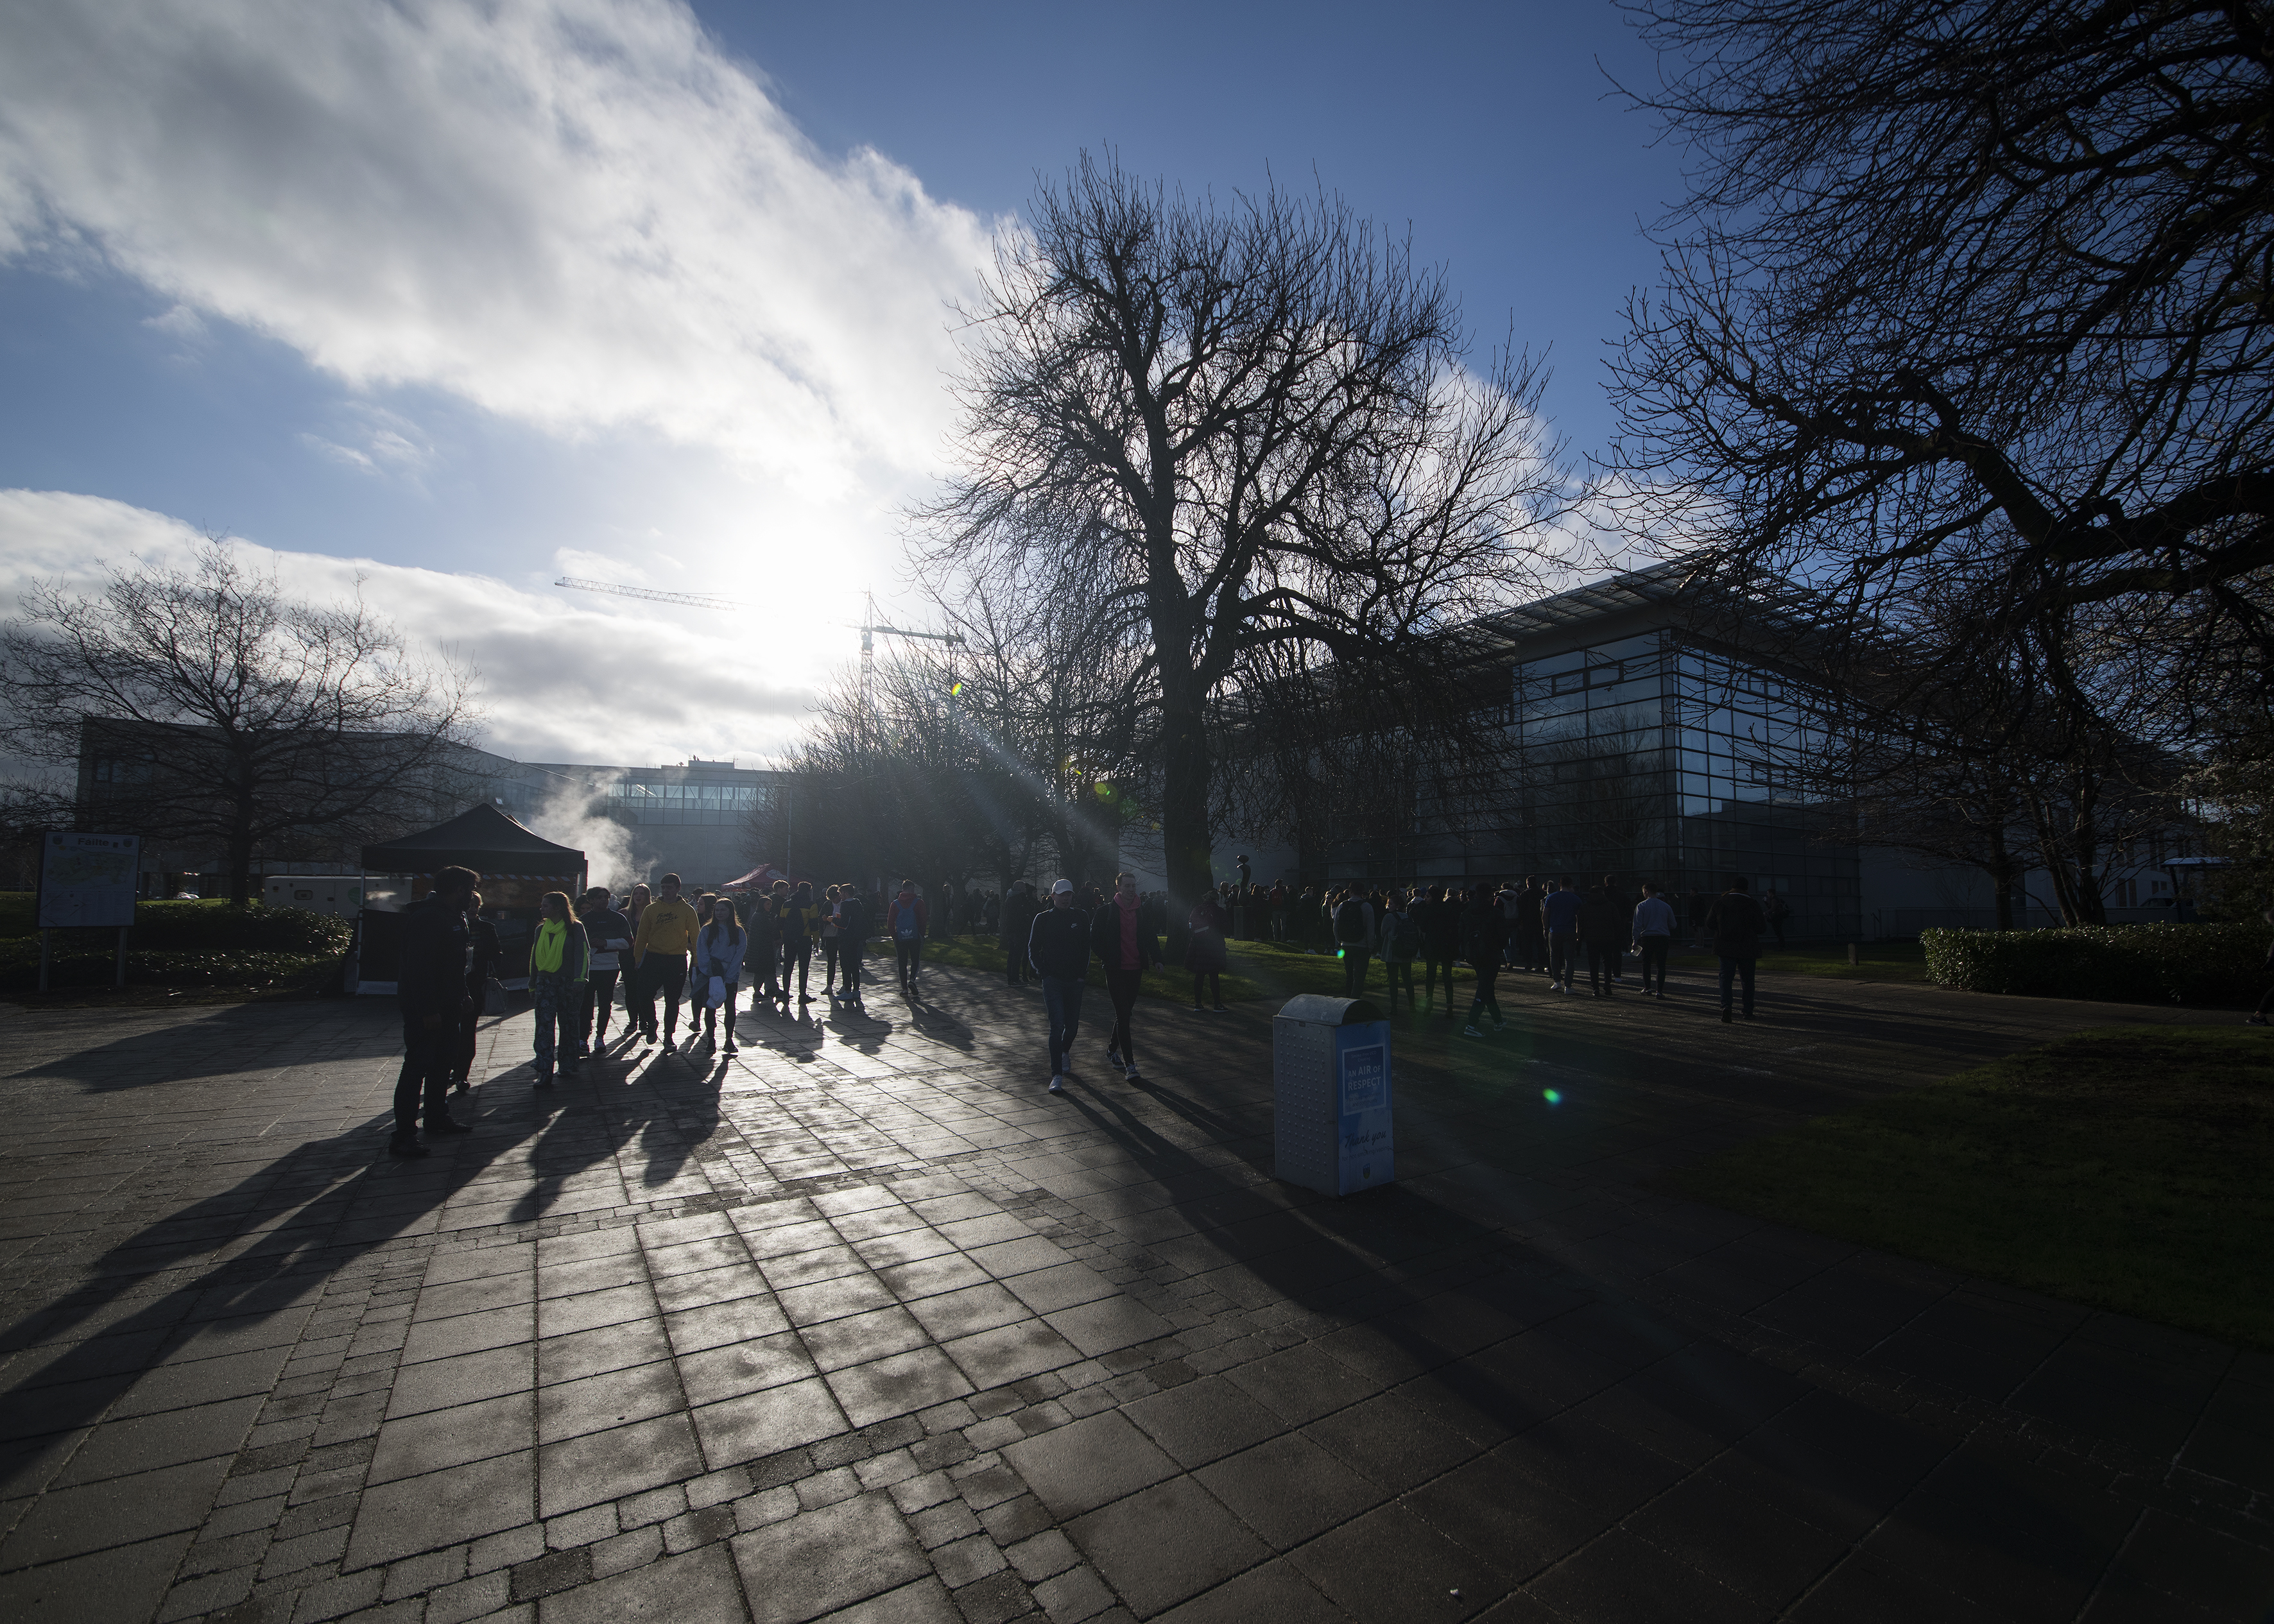 Image of UCD campus with students gathered in the foreground with university buildings behind, a tree silhouetted against a winter sky with clouds and sun shining through